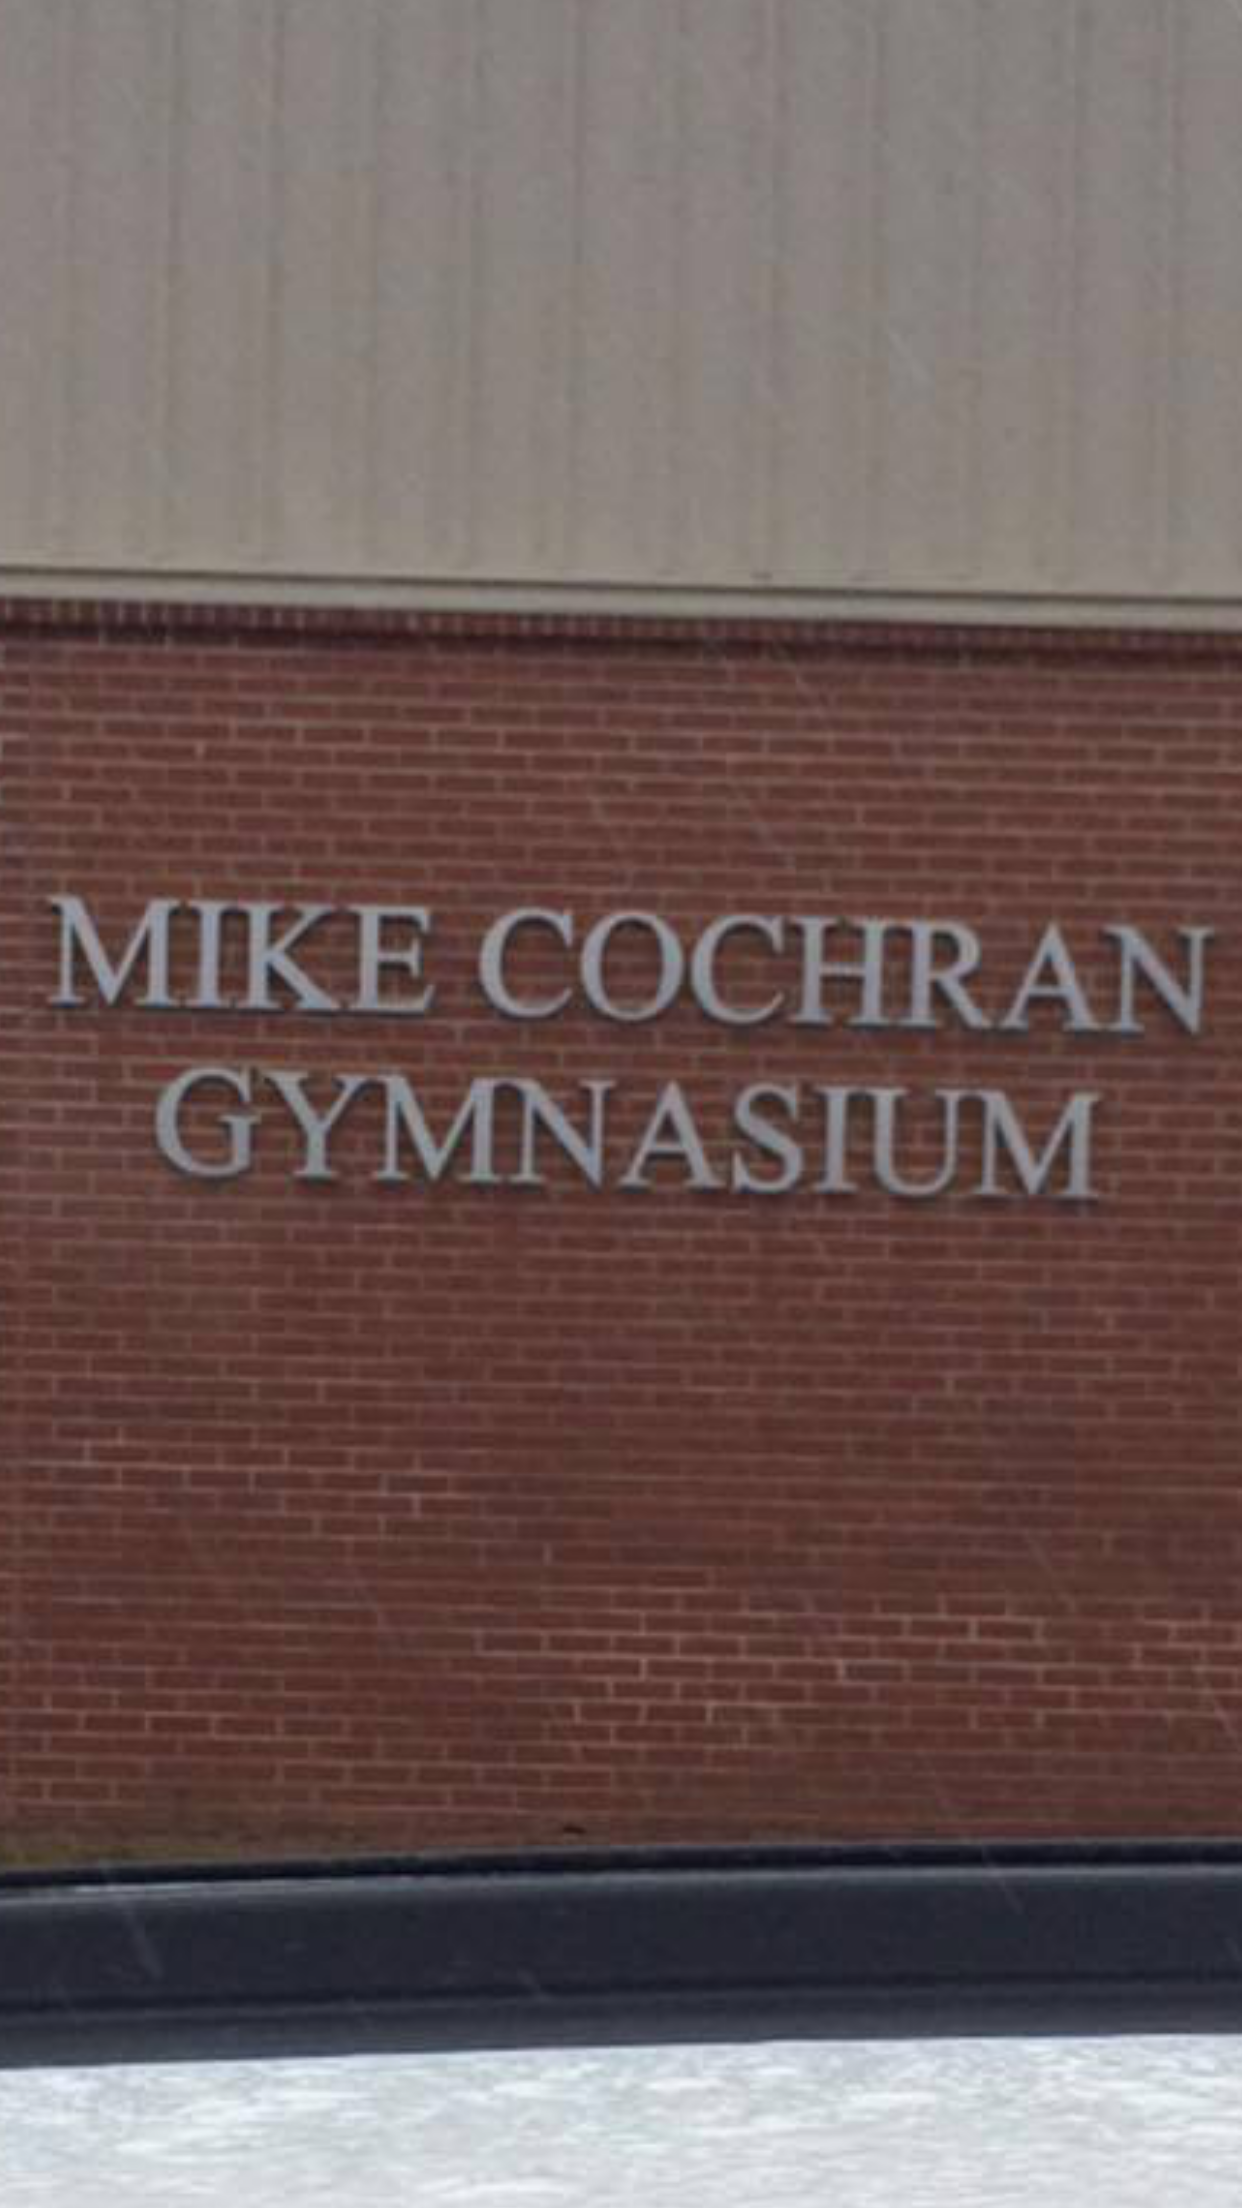 Fyffe Gym to be dedicated 'Mike Cochran Gymnasium' this Tuesday